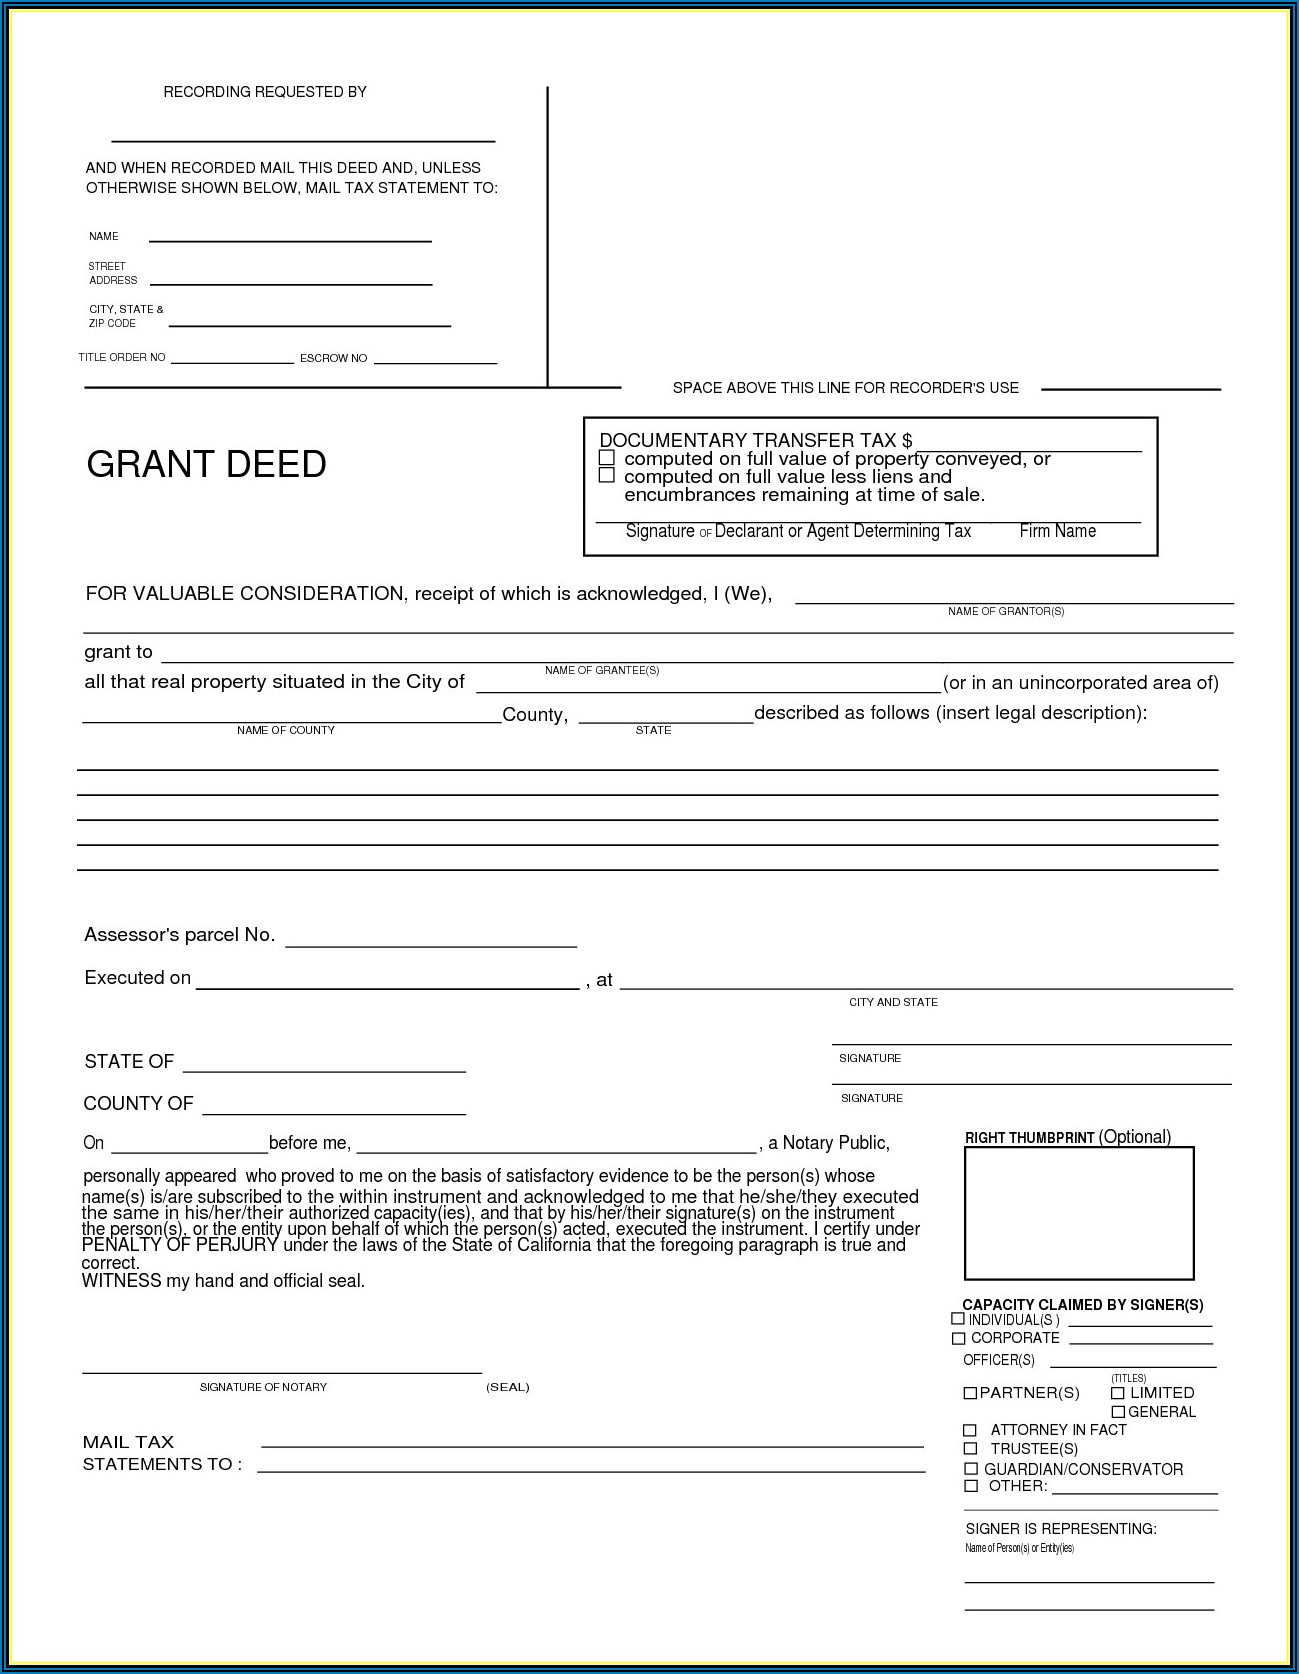 Grant Deed Form Los Angeles County